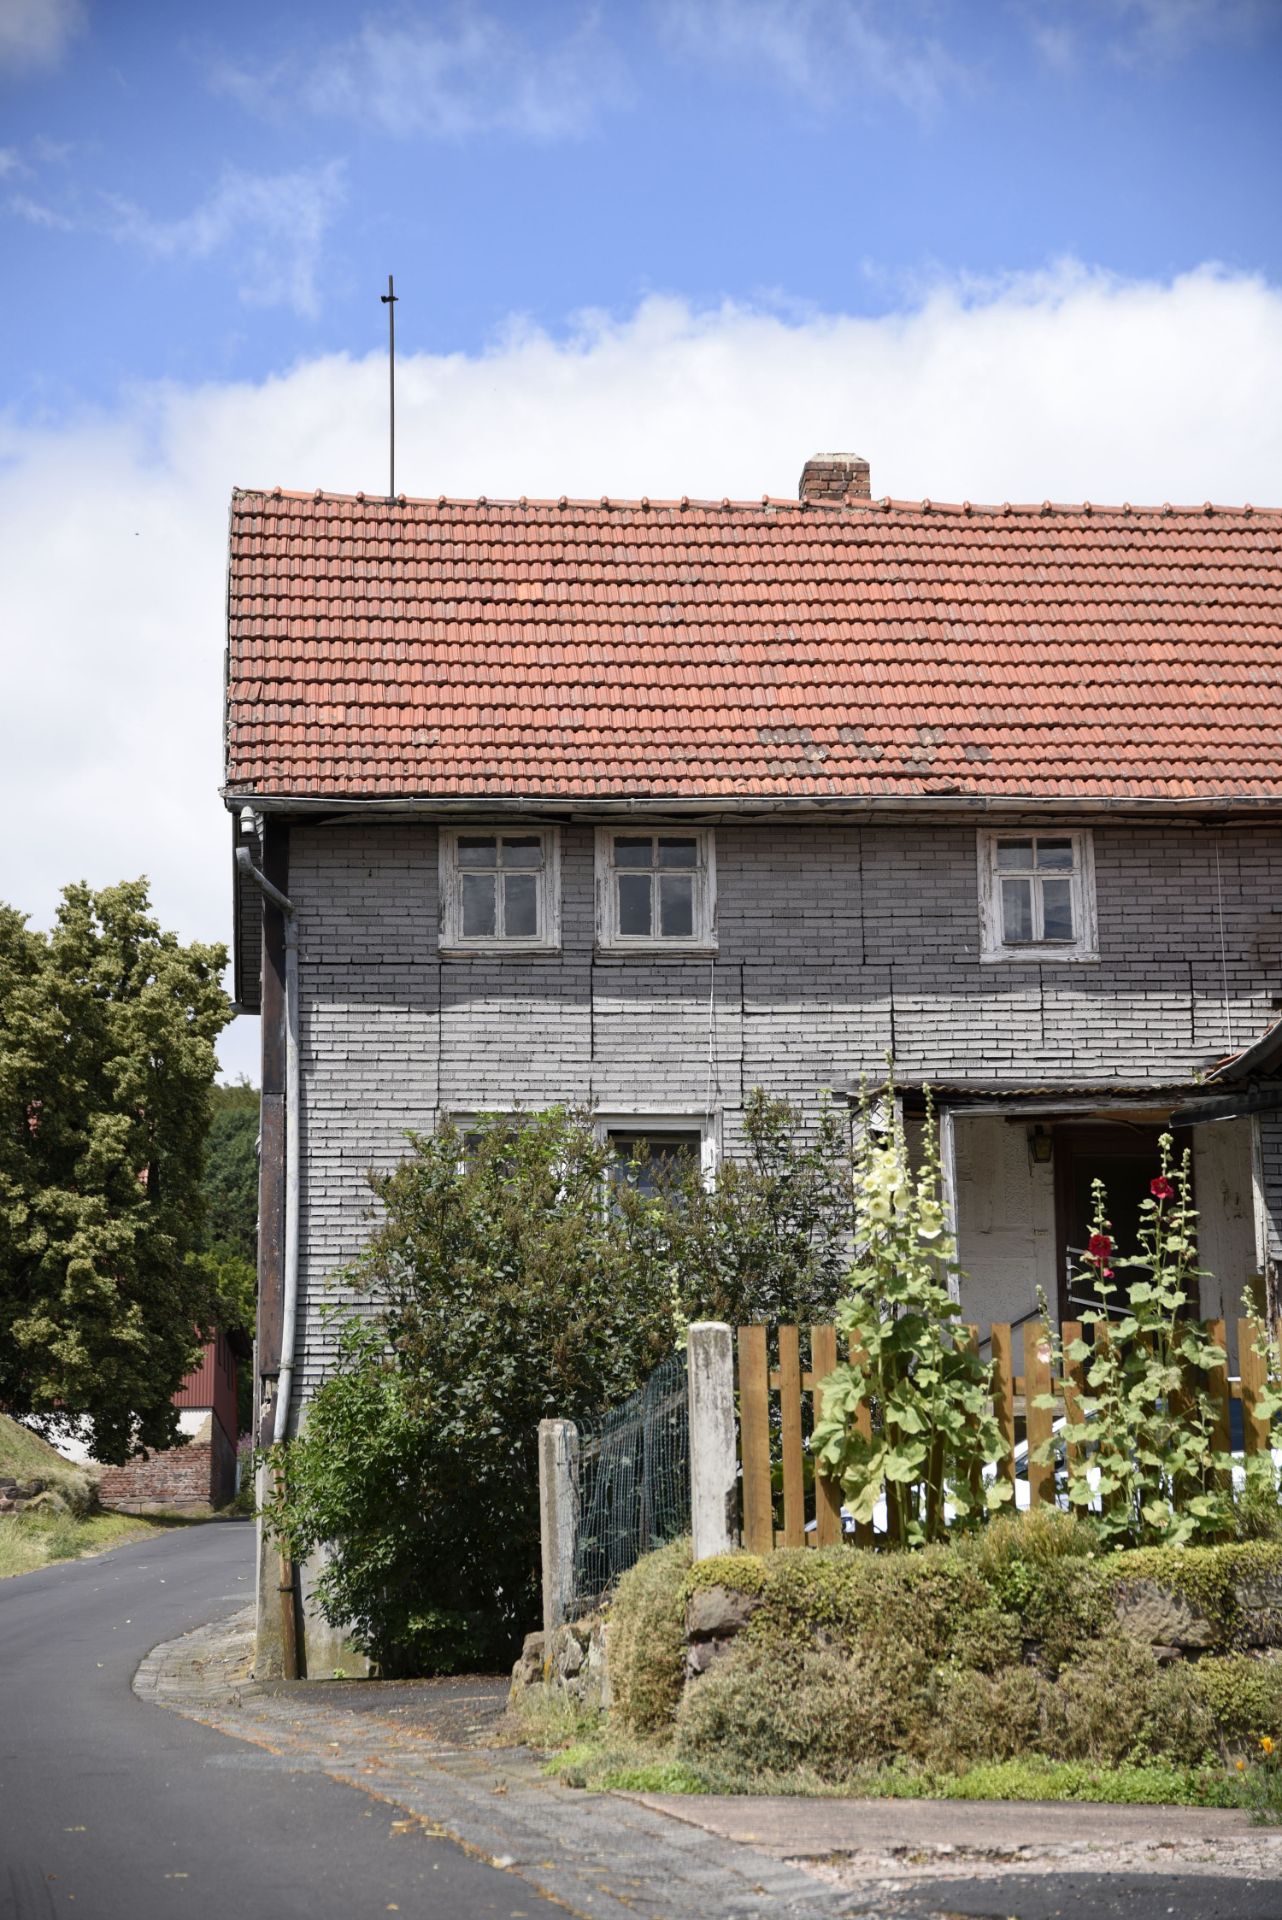 Freehold Property With 691 SQM Of Land In The Village Of Unterstoppel, Germany! - Image 18 of 60